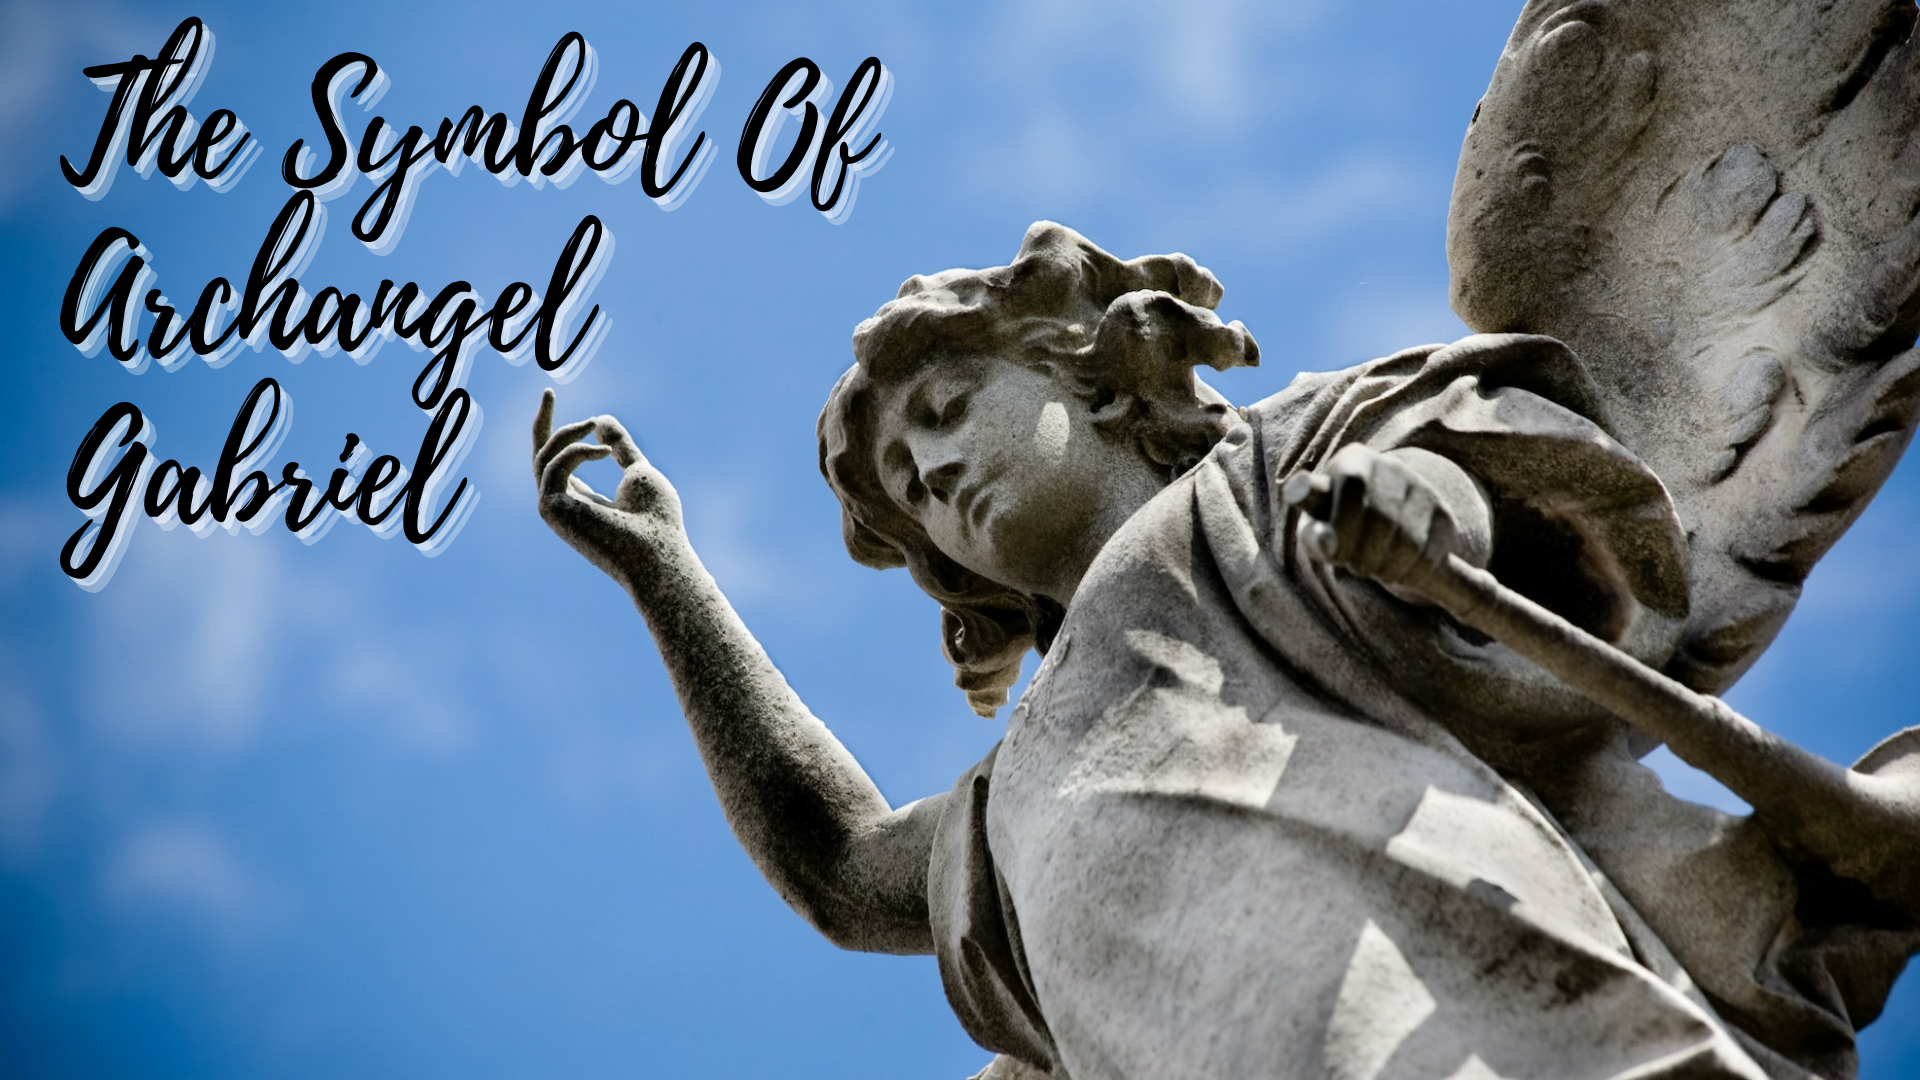 A statue of an angel with sky on its background and words The Symbol Of Archangel Gabriel